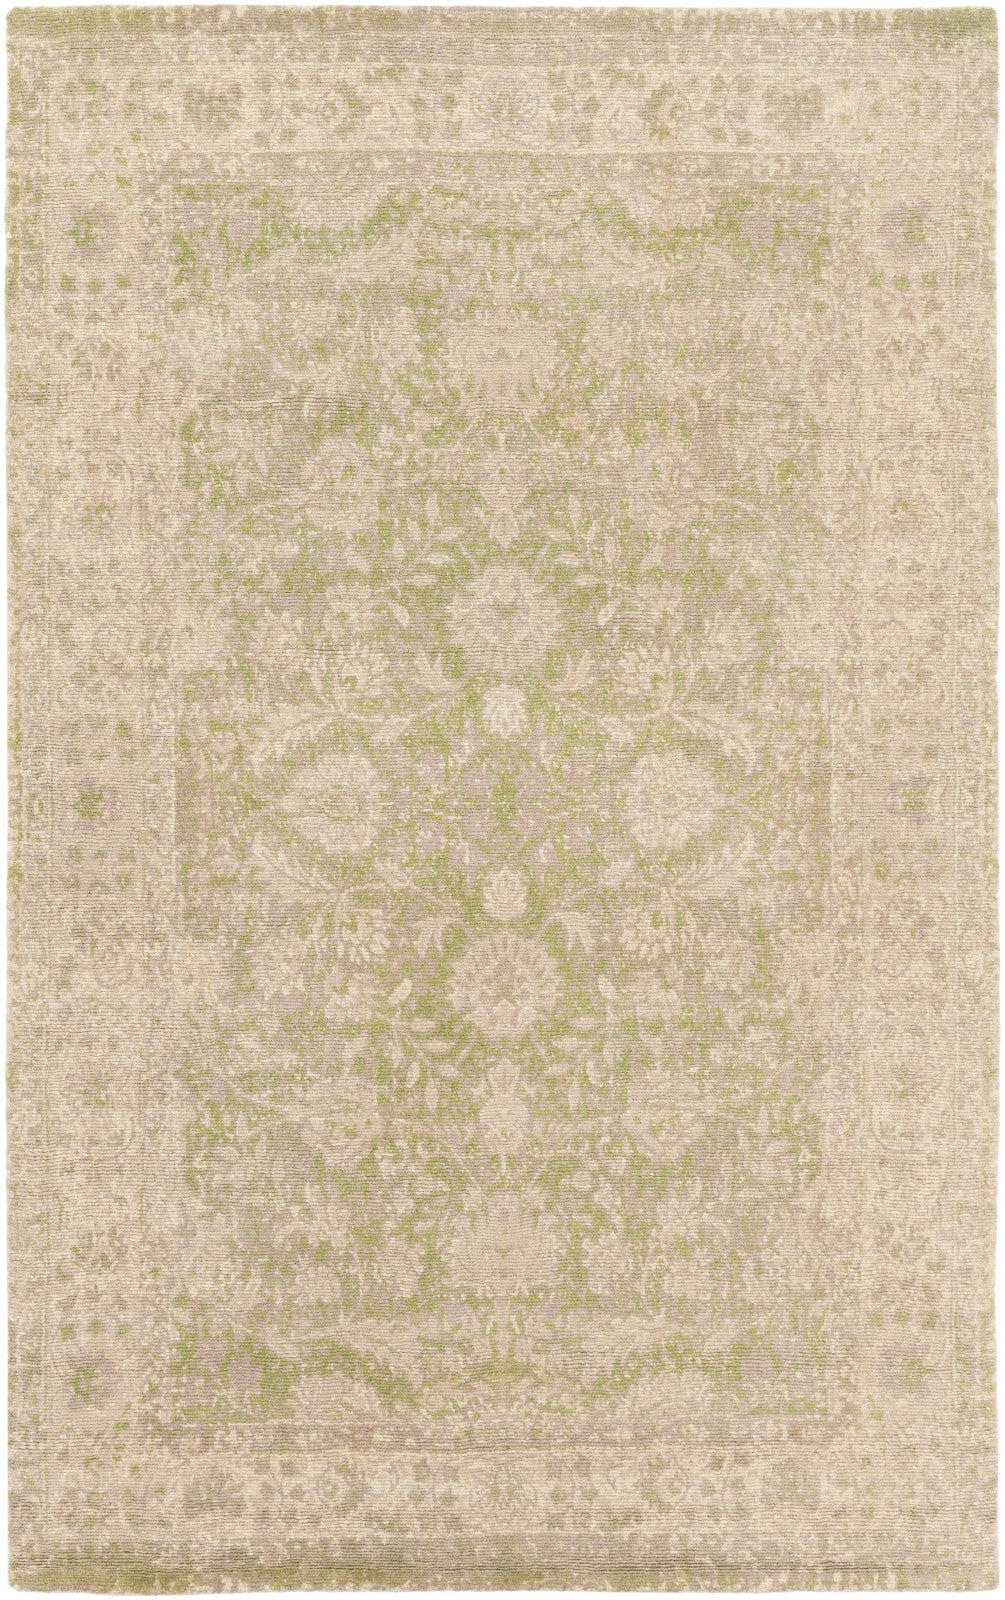 Edith EDT-1011 White Hand Loomed Area Rug by Surya